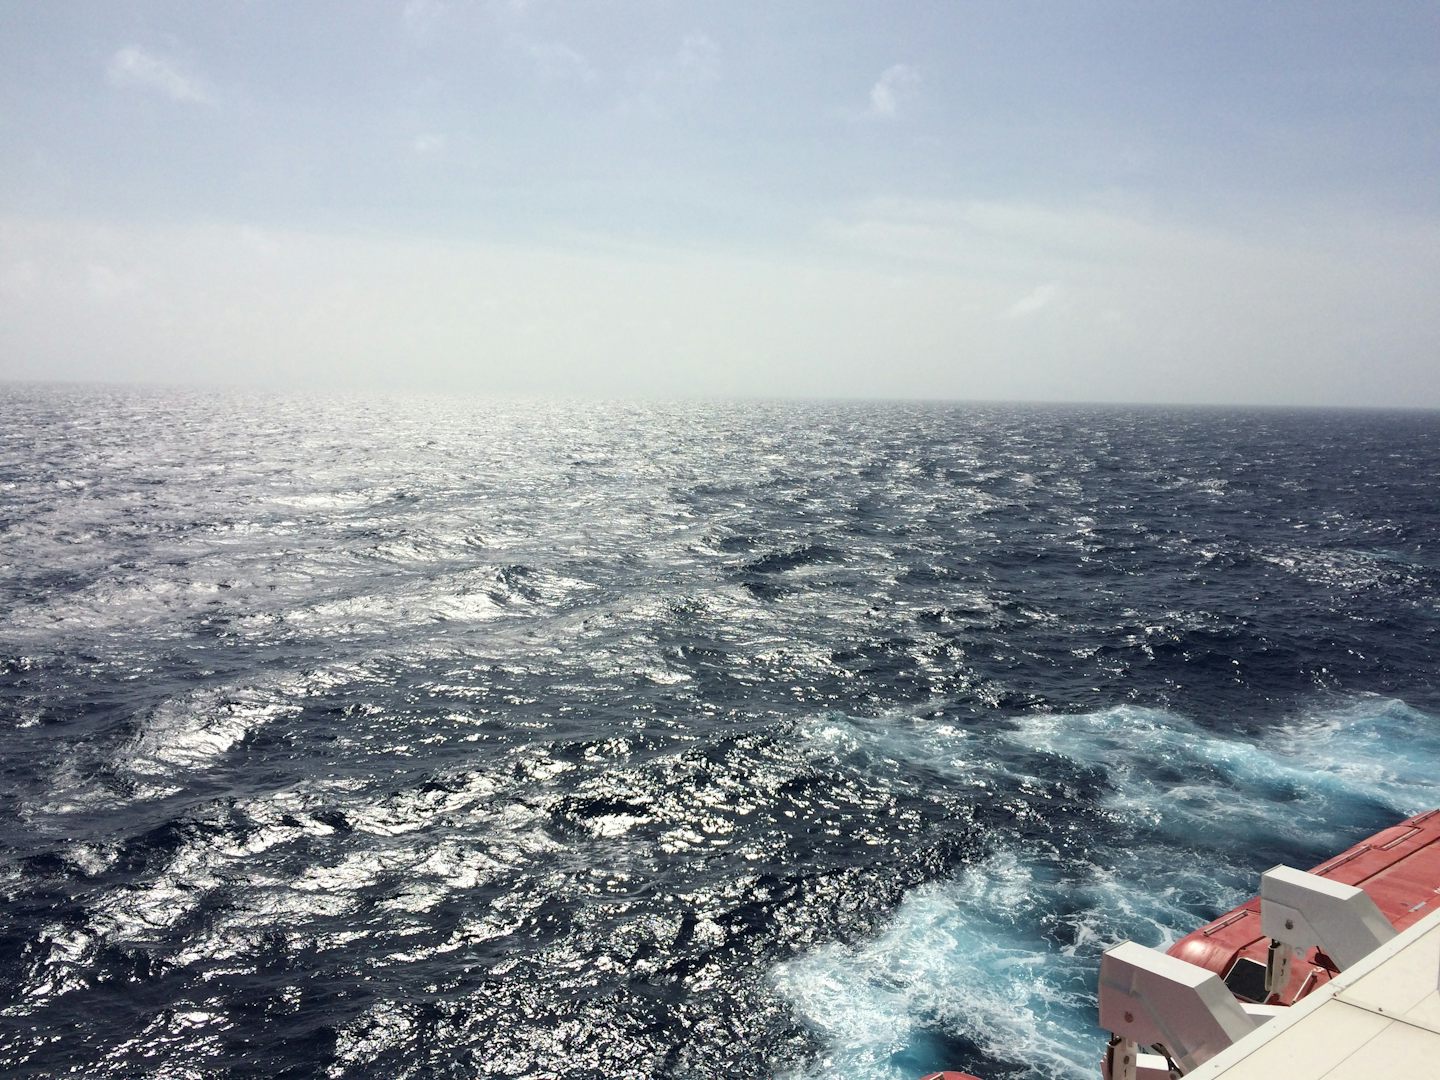 View from the balcony at sea